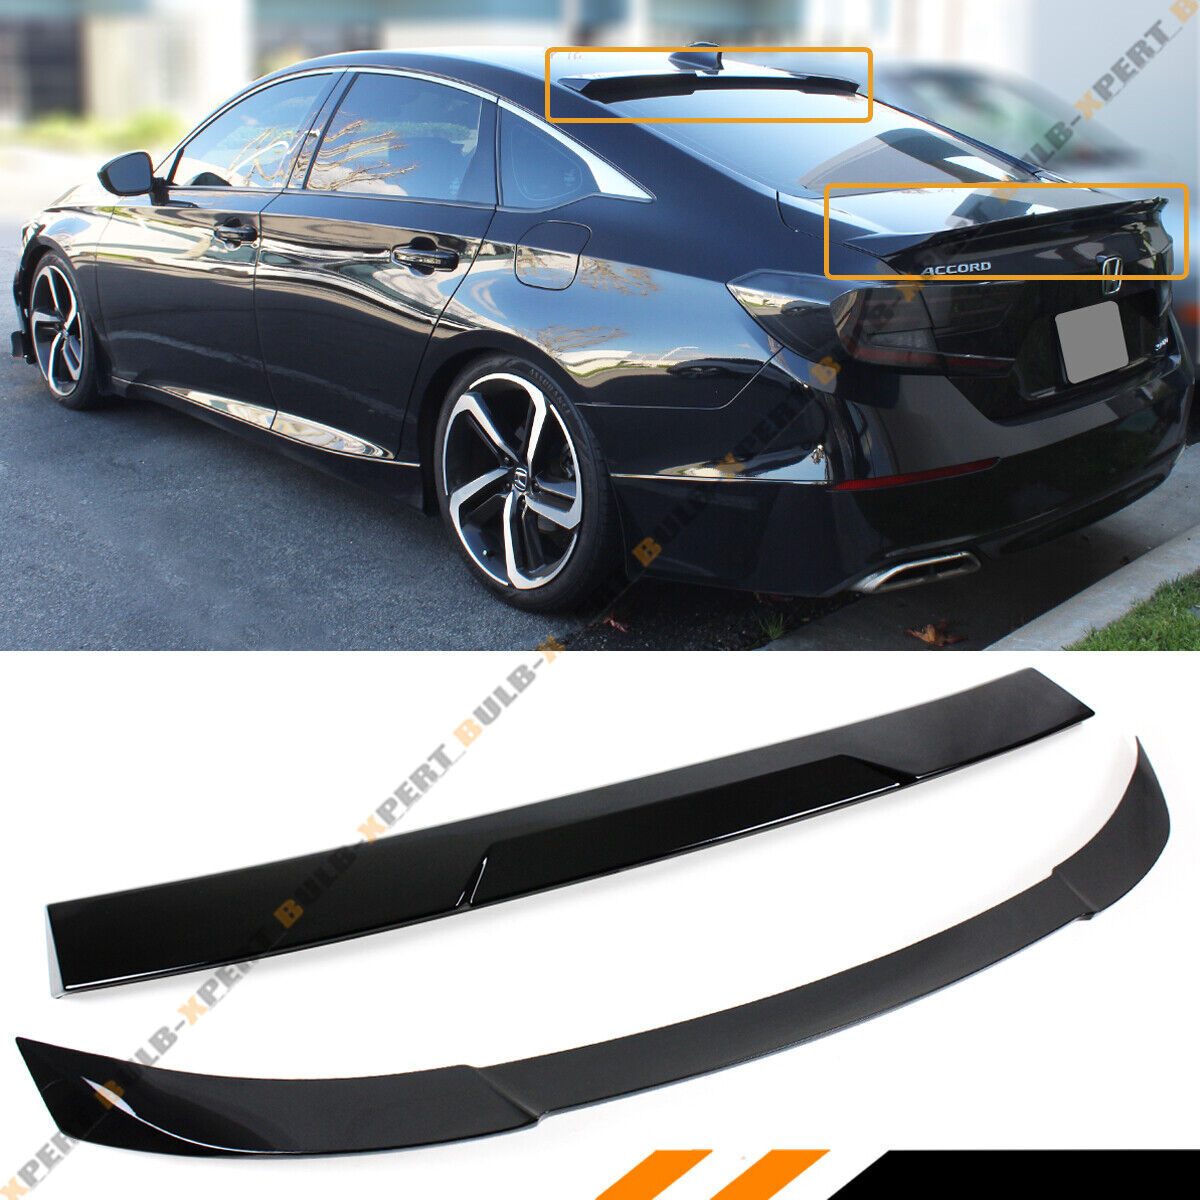 FOR 2018-2022 ACCORD AKASAKA PAINTED BLACK TRUNK LID + REAR WINDOW ROOF SPOILER